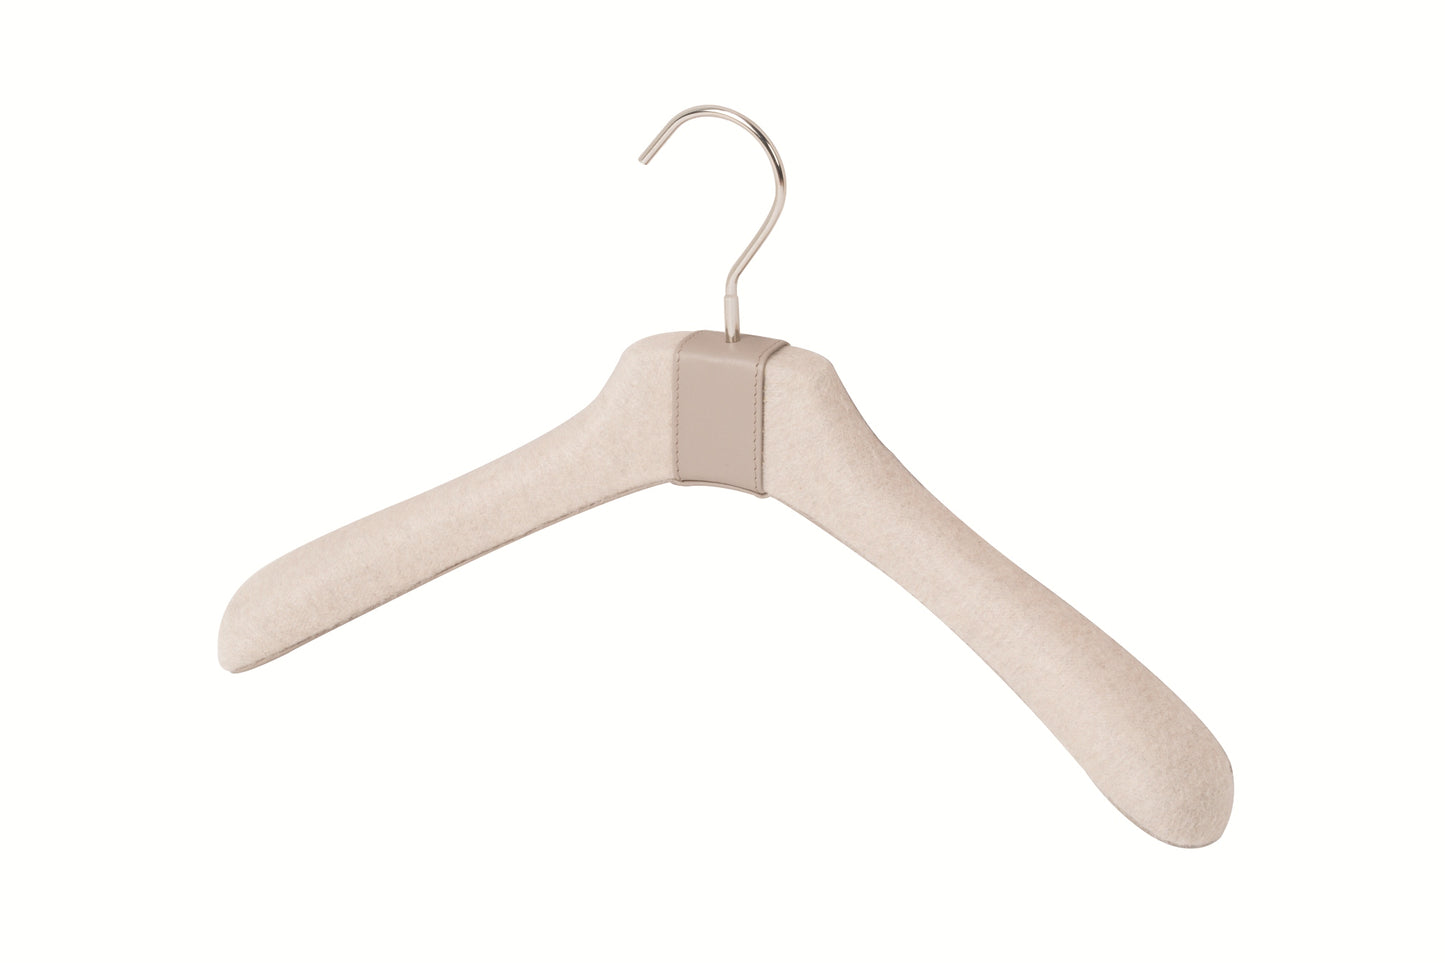 Brunello Clothes Leather & Cashmere Covered Wood HangerGiobagnara Brunello Clothes Leather & Cashmere Covered Wood Hanger | Stylish Wardrobe Accessories, Elegant Closet Organization & Gift Items | 2Jour Concierge, #1 luxury high-end gift & lifestyle shop